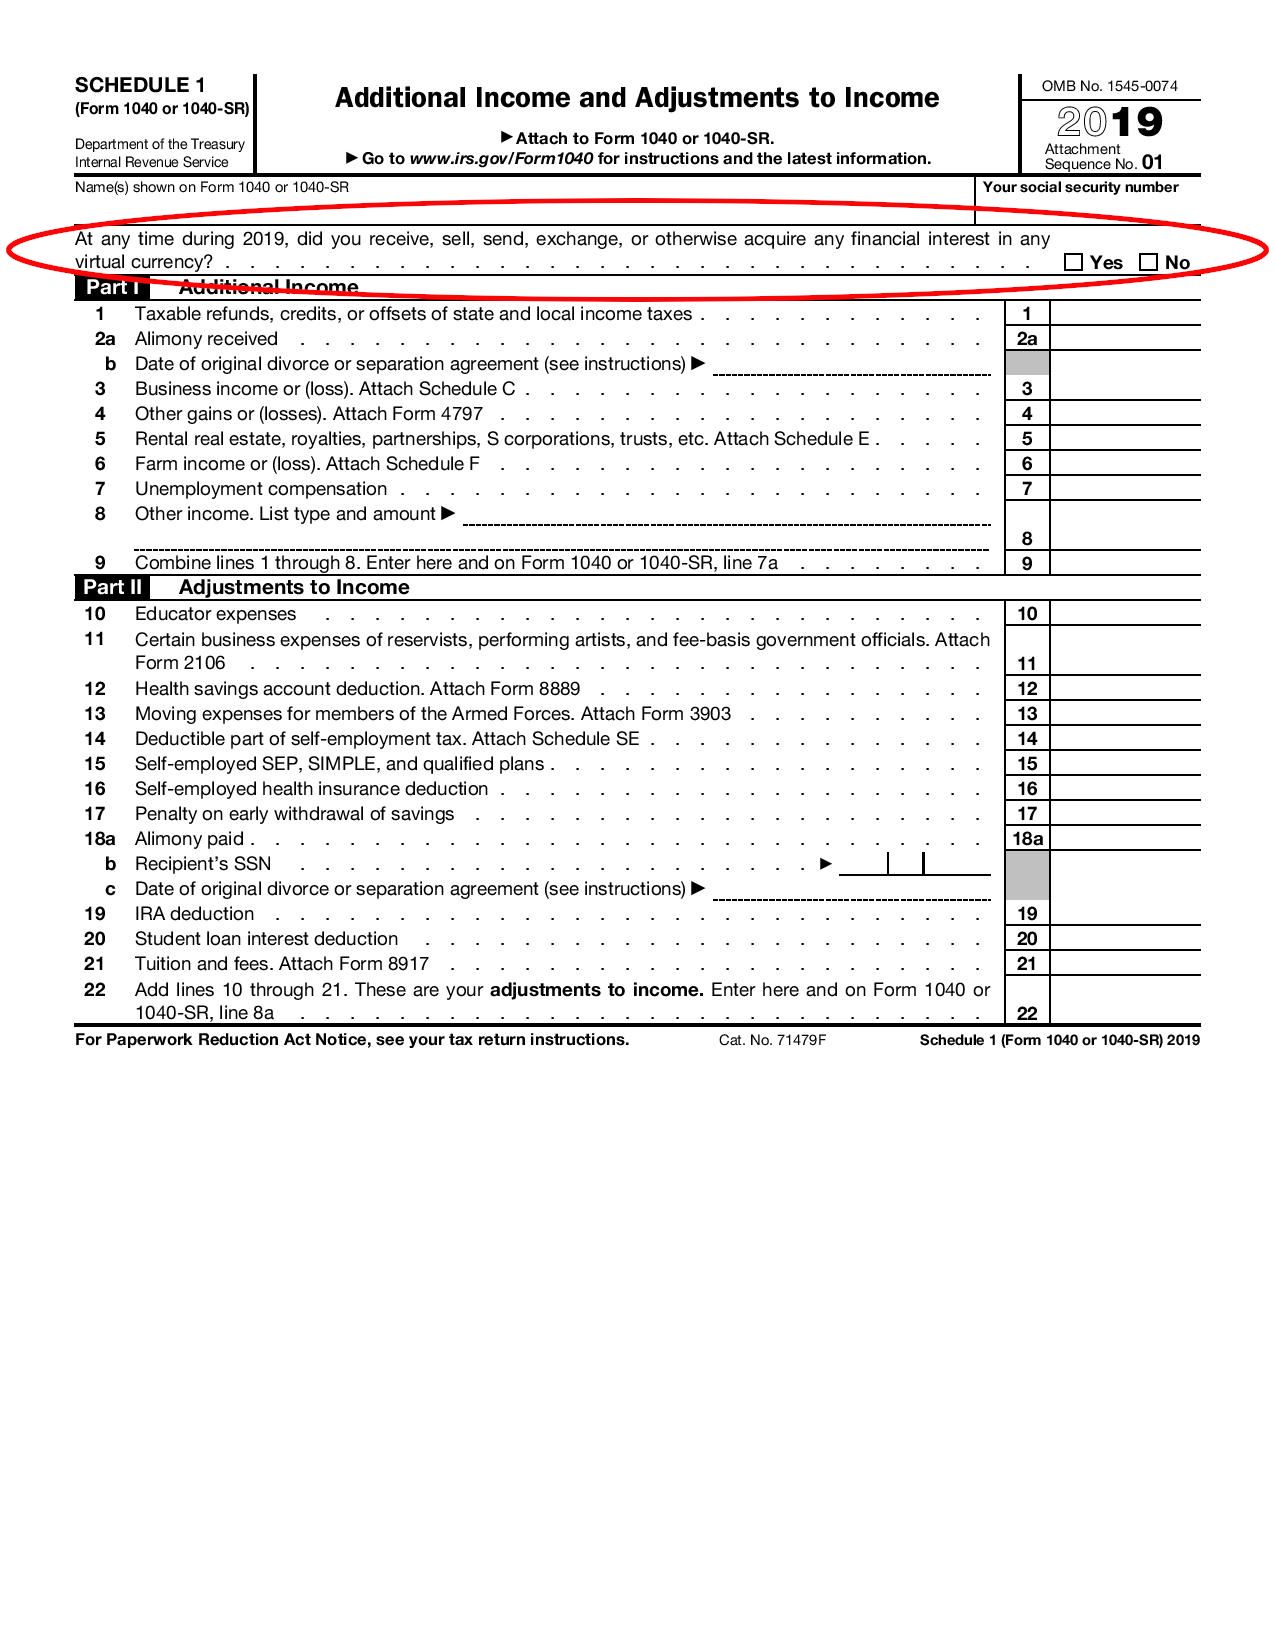 IRS Schedule 1 (Form 1040), with the "crypto question" circled in red.